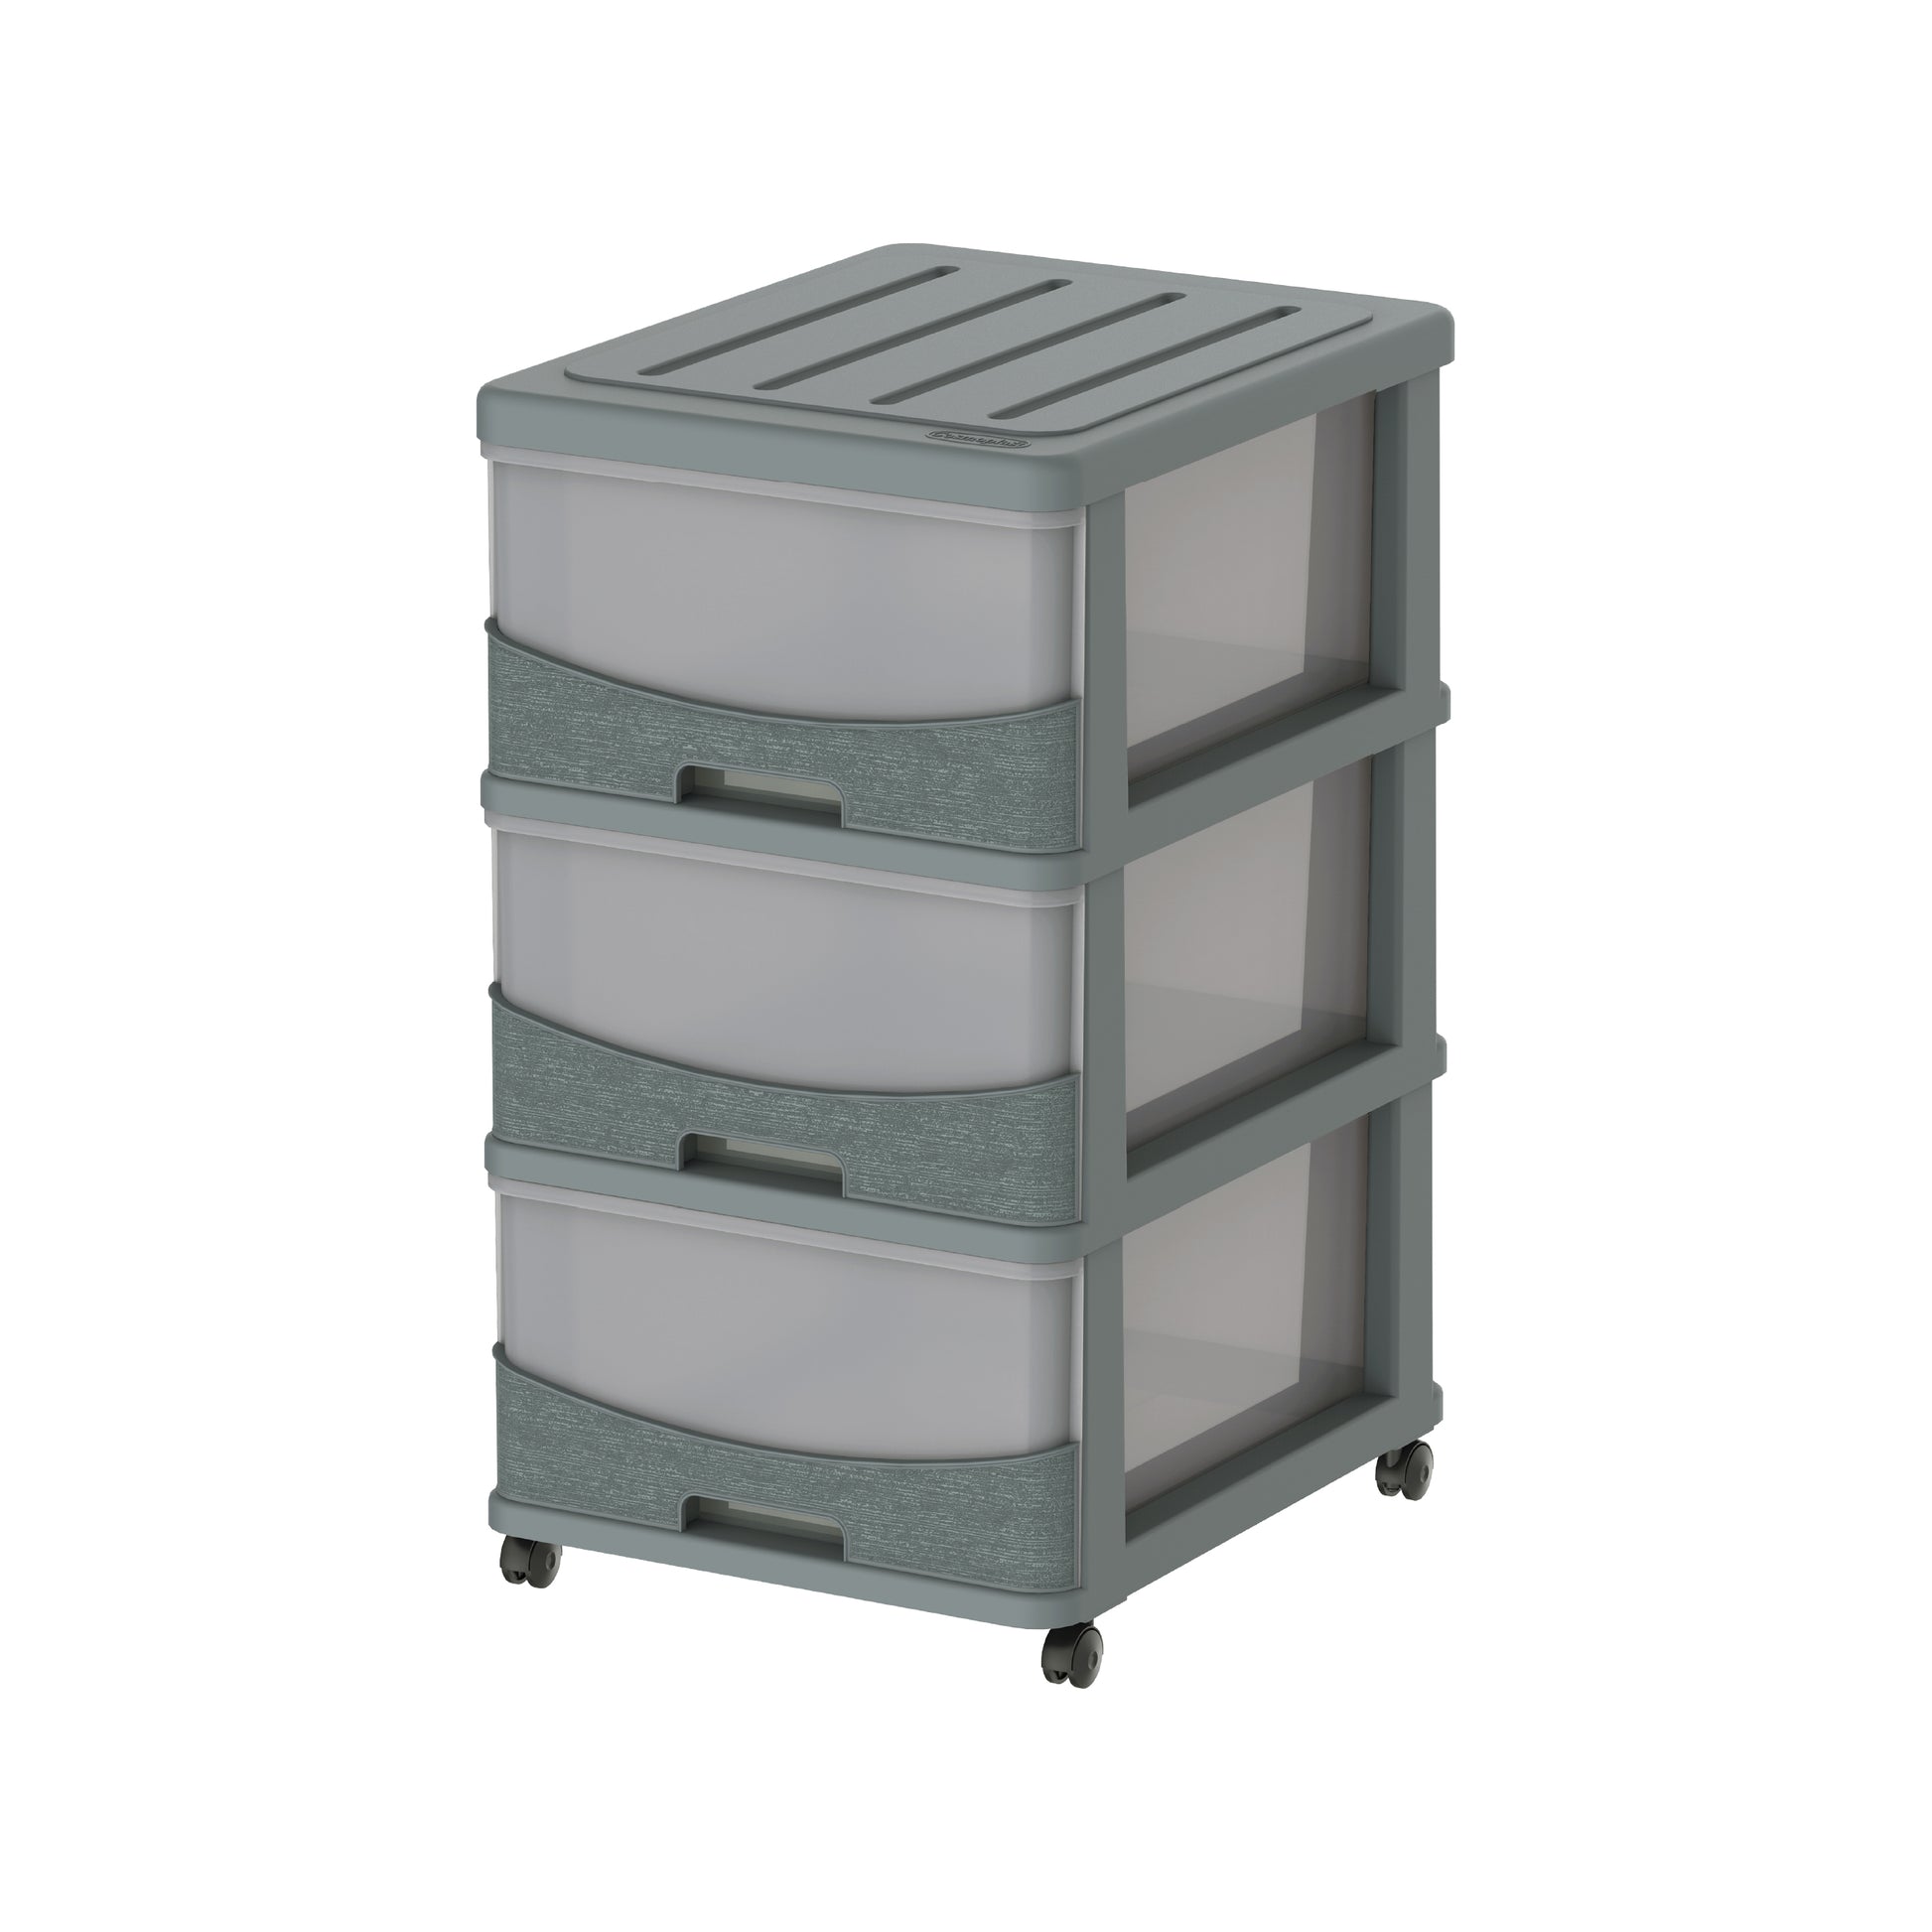  3 Tiers Storage Cabinet with Drawers & Wheels